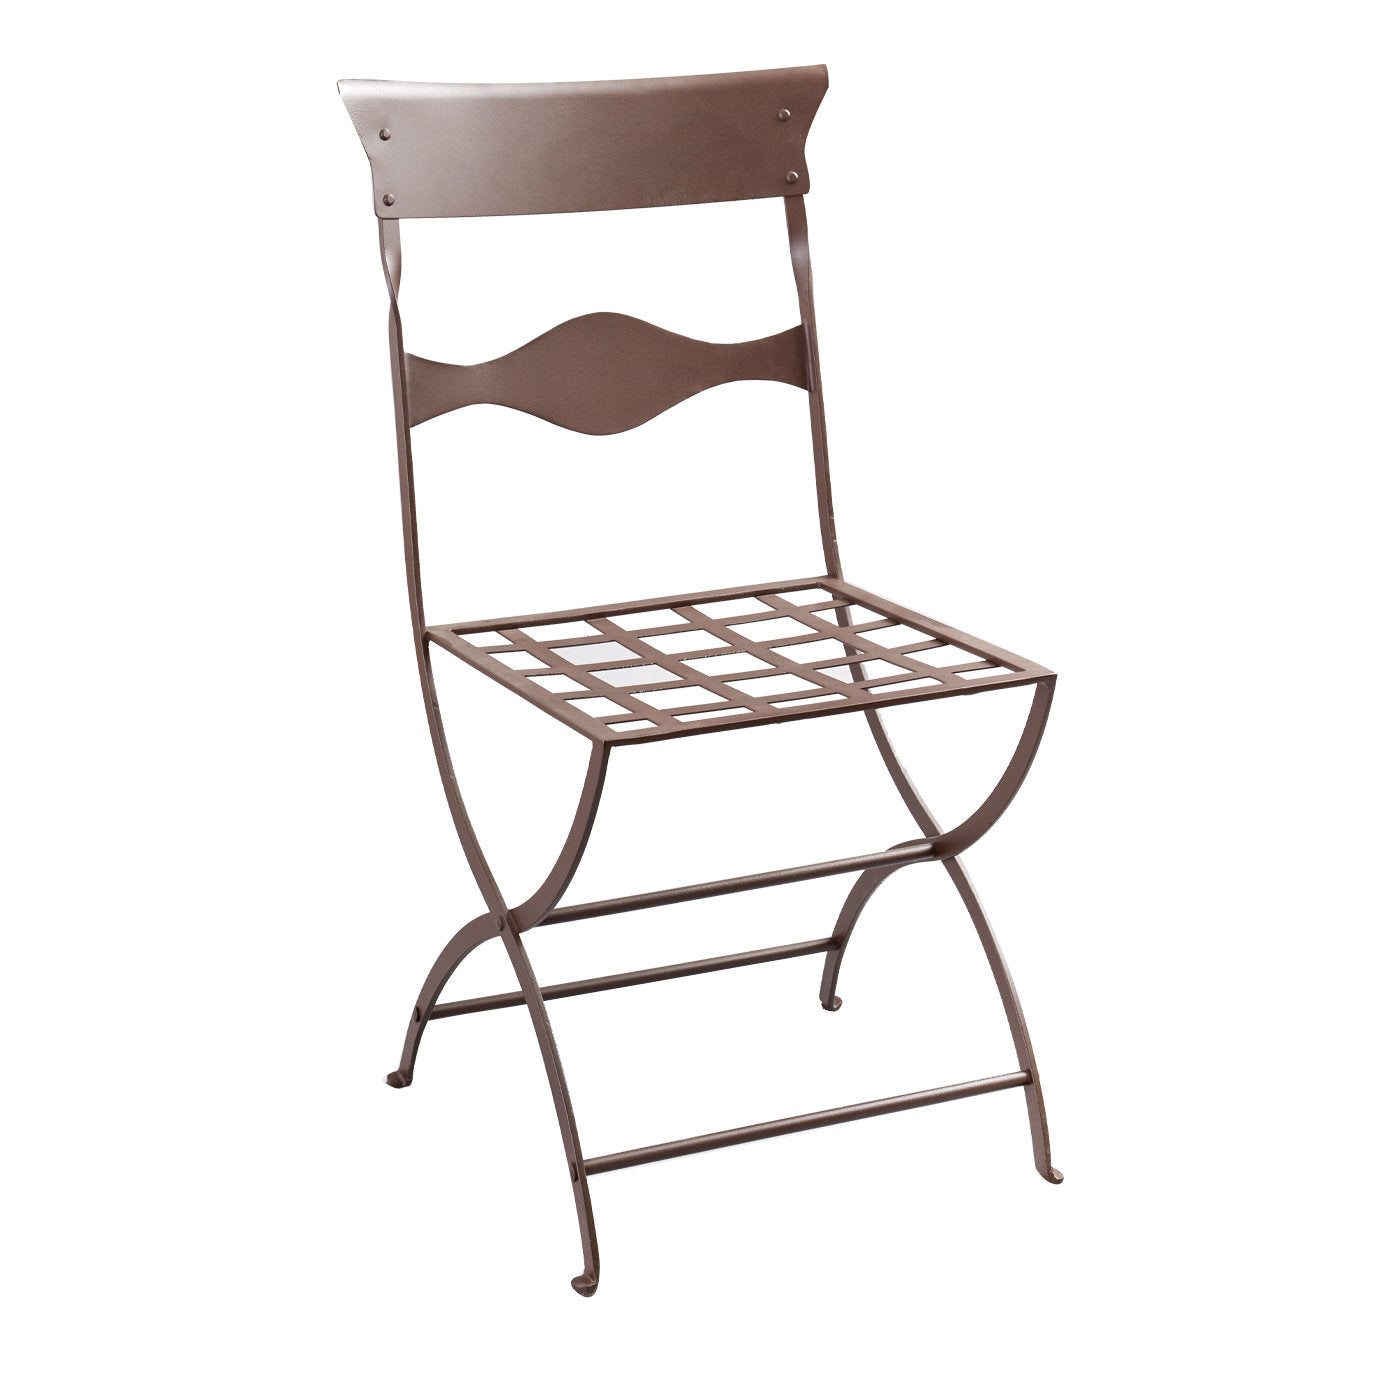 Due Lamiere Chair in Stainless Steel - Main view